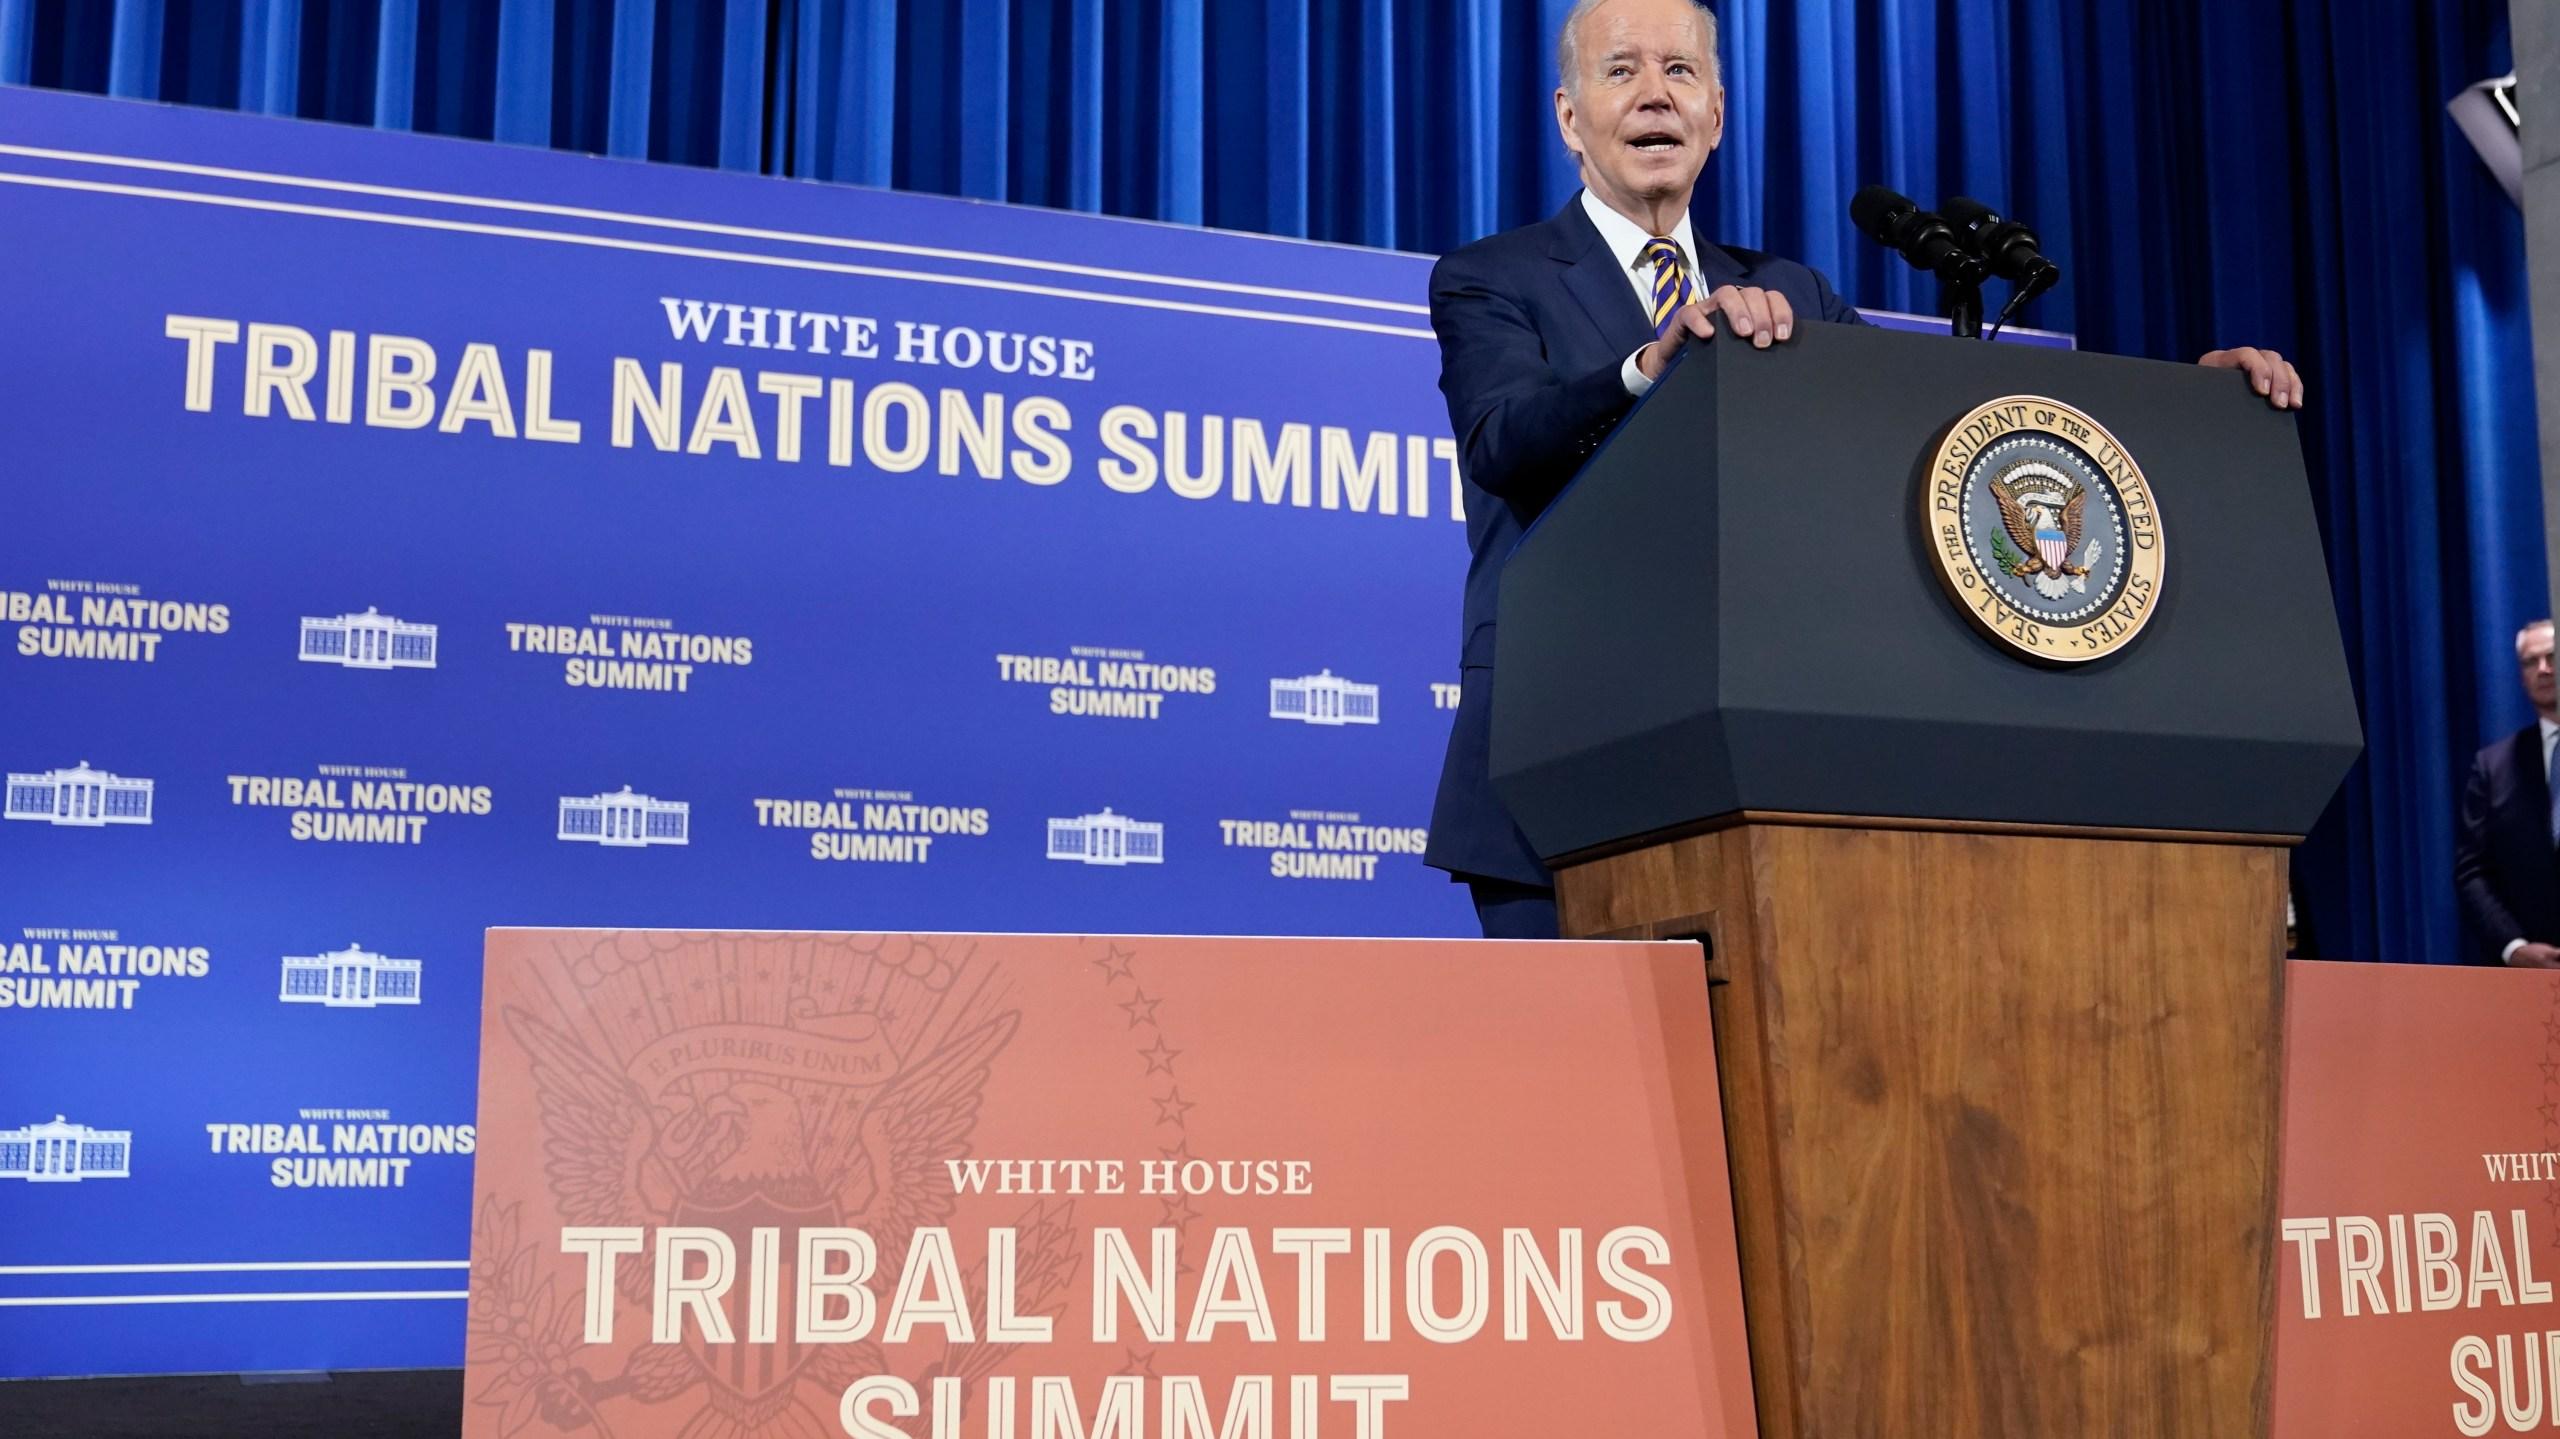 President Joe Biden And The White House Support Indigenous